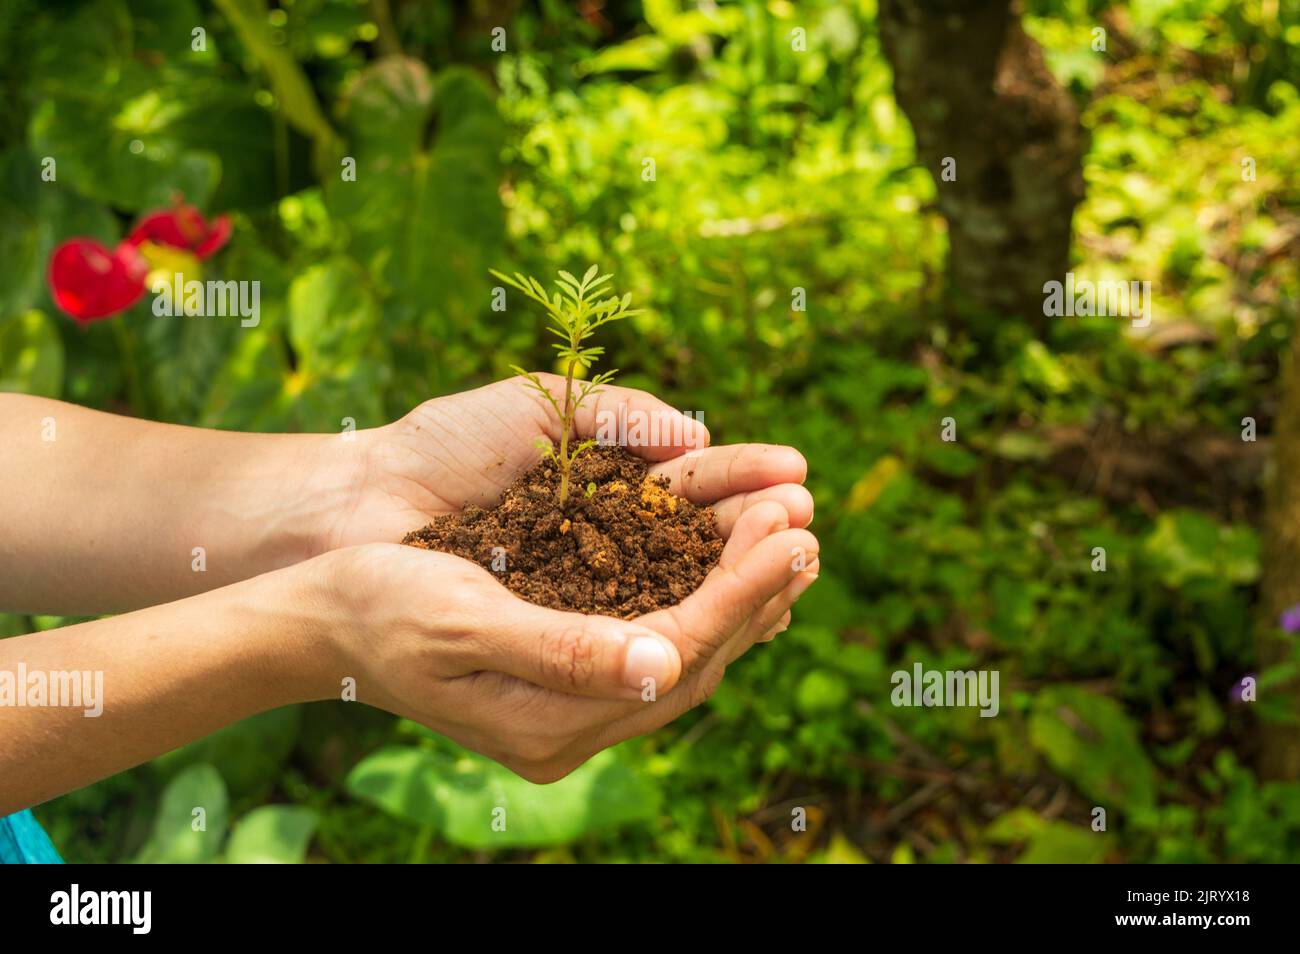 A seedling is a young plant developing out of a plant embryo from a seed. Seedling development starts with germination of the seed. Stock Photo